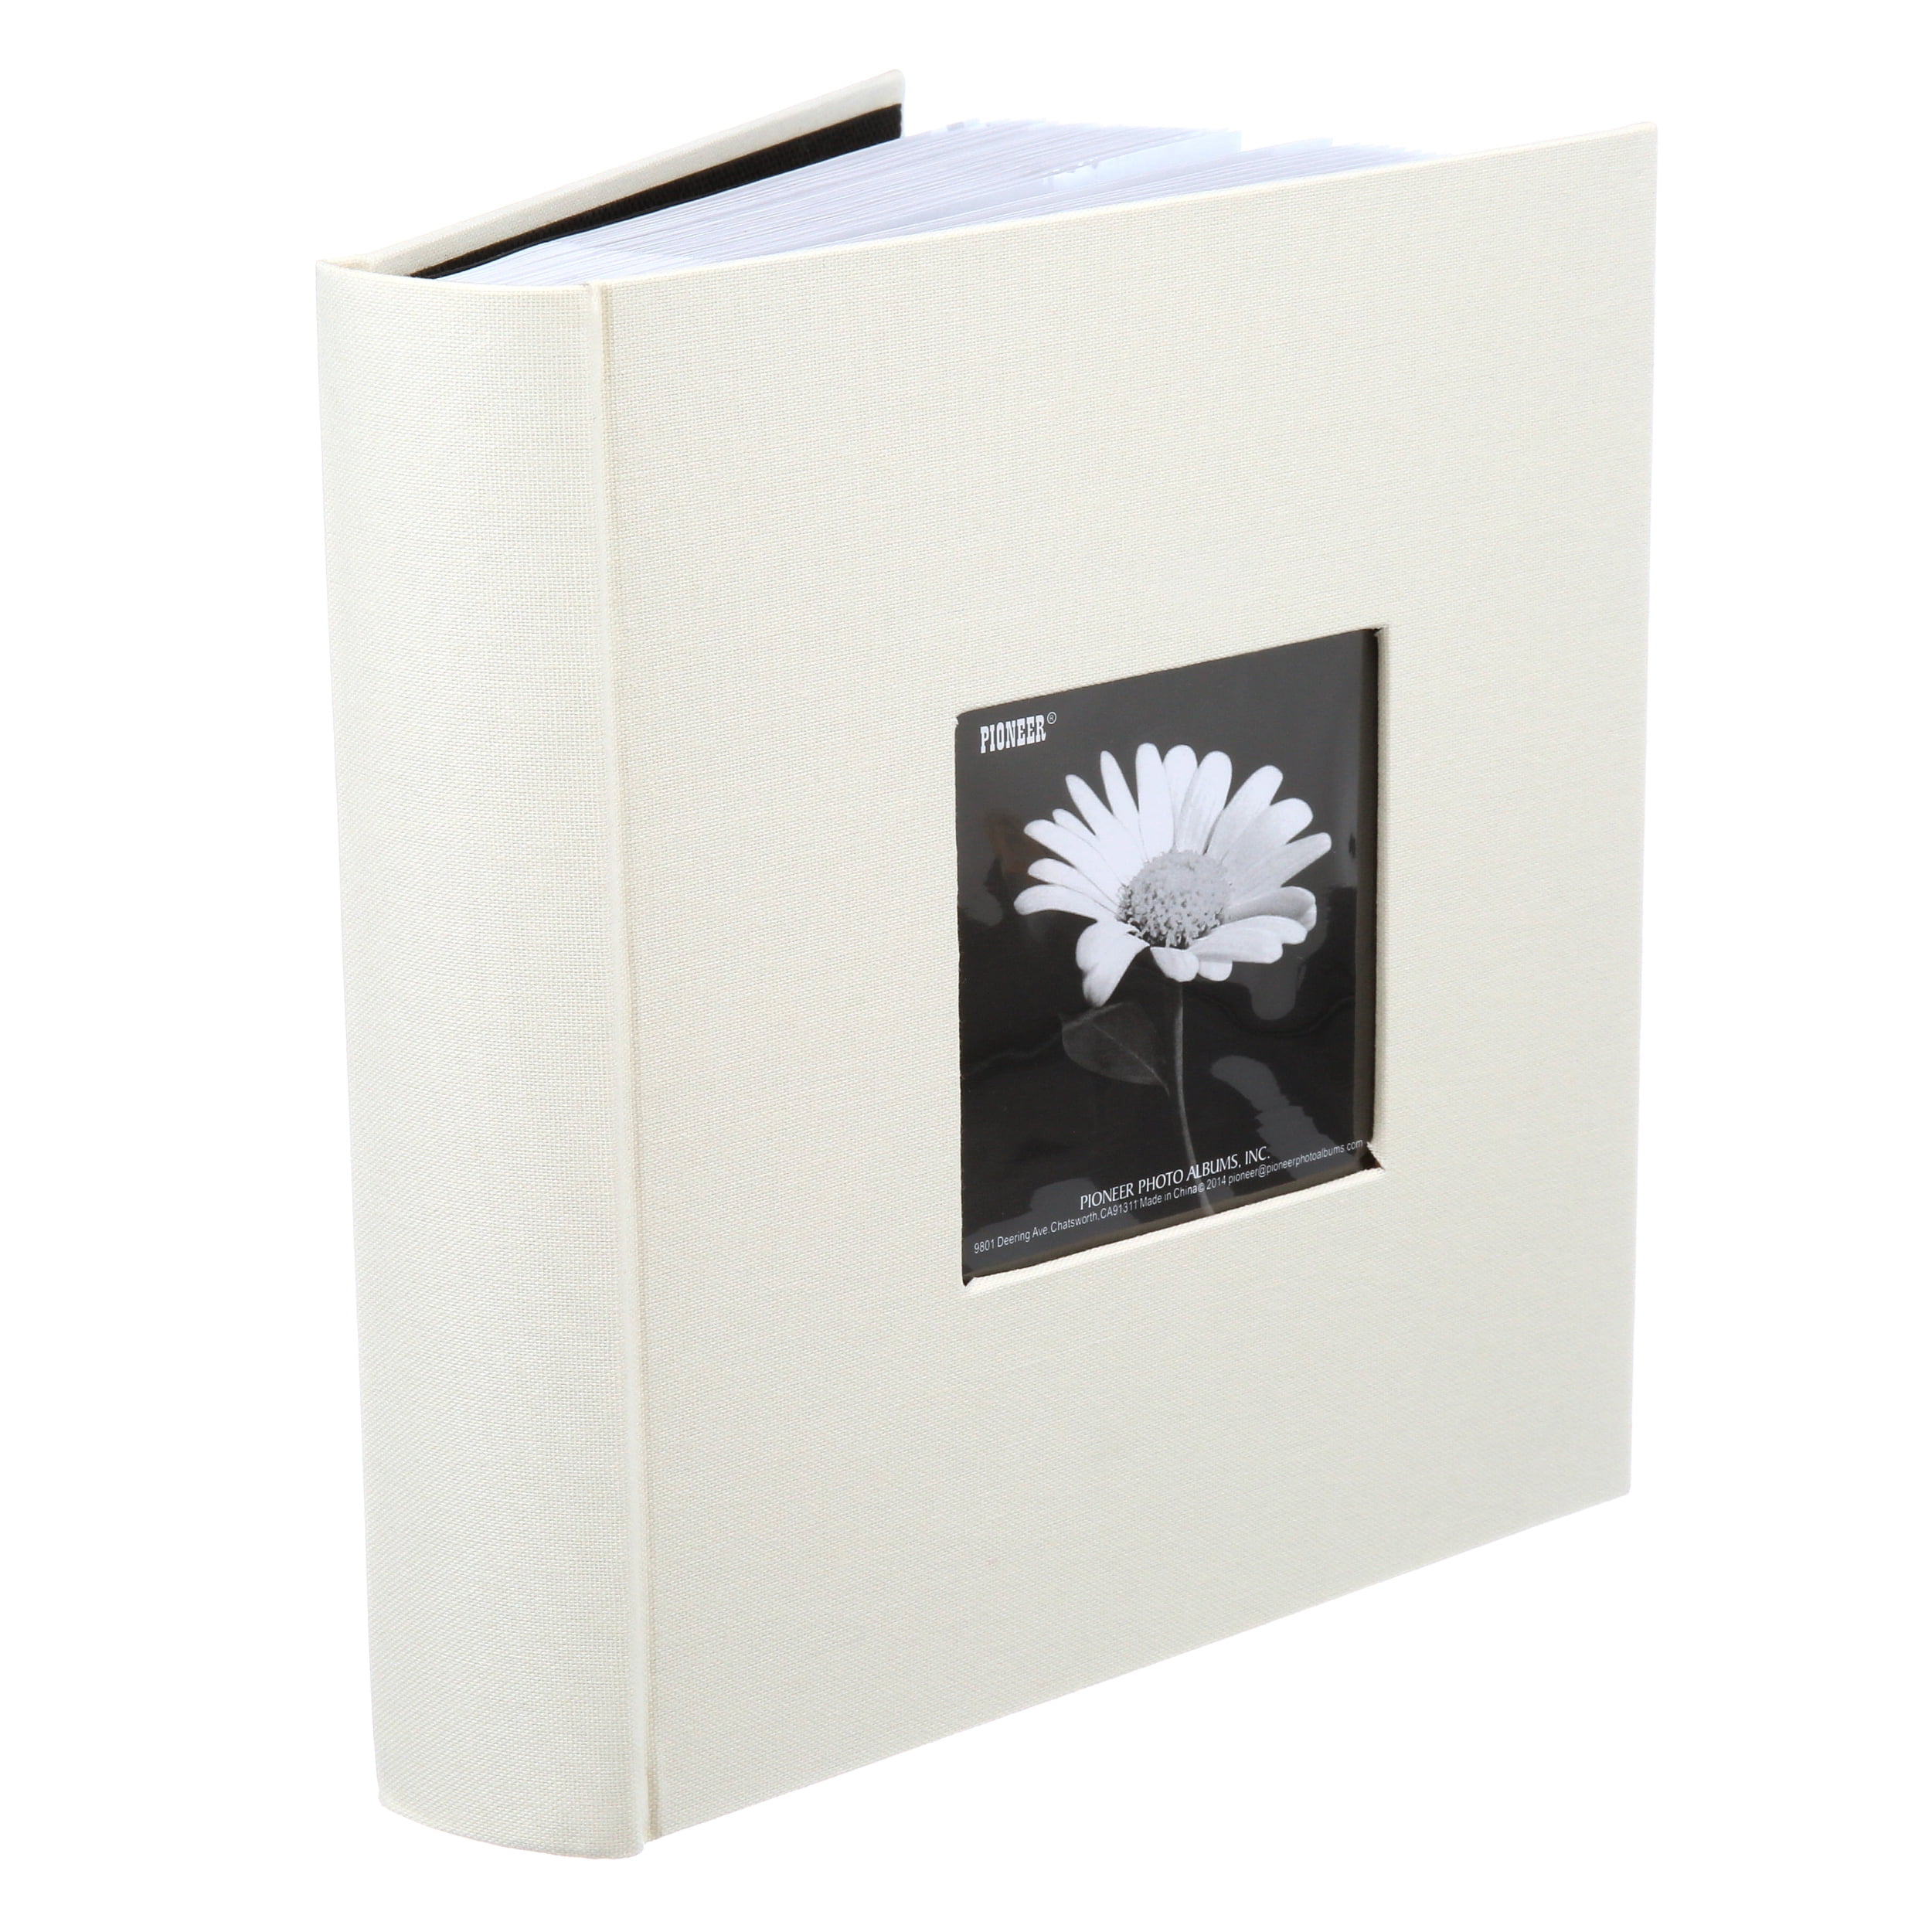 Genuine Pioneer® 4x6 album pocket page refills for 8x8 albums - Picture  Frames, Photo Albums, Personalized and Engraved Digital Photo Gifts -  SendAFrame